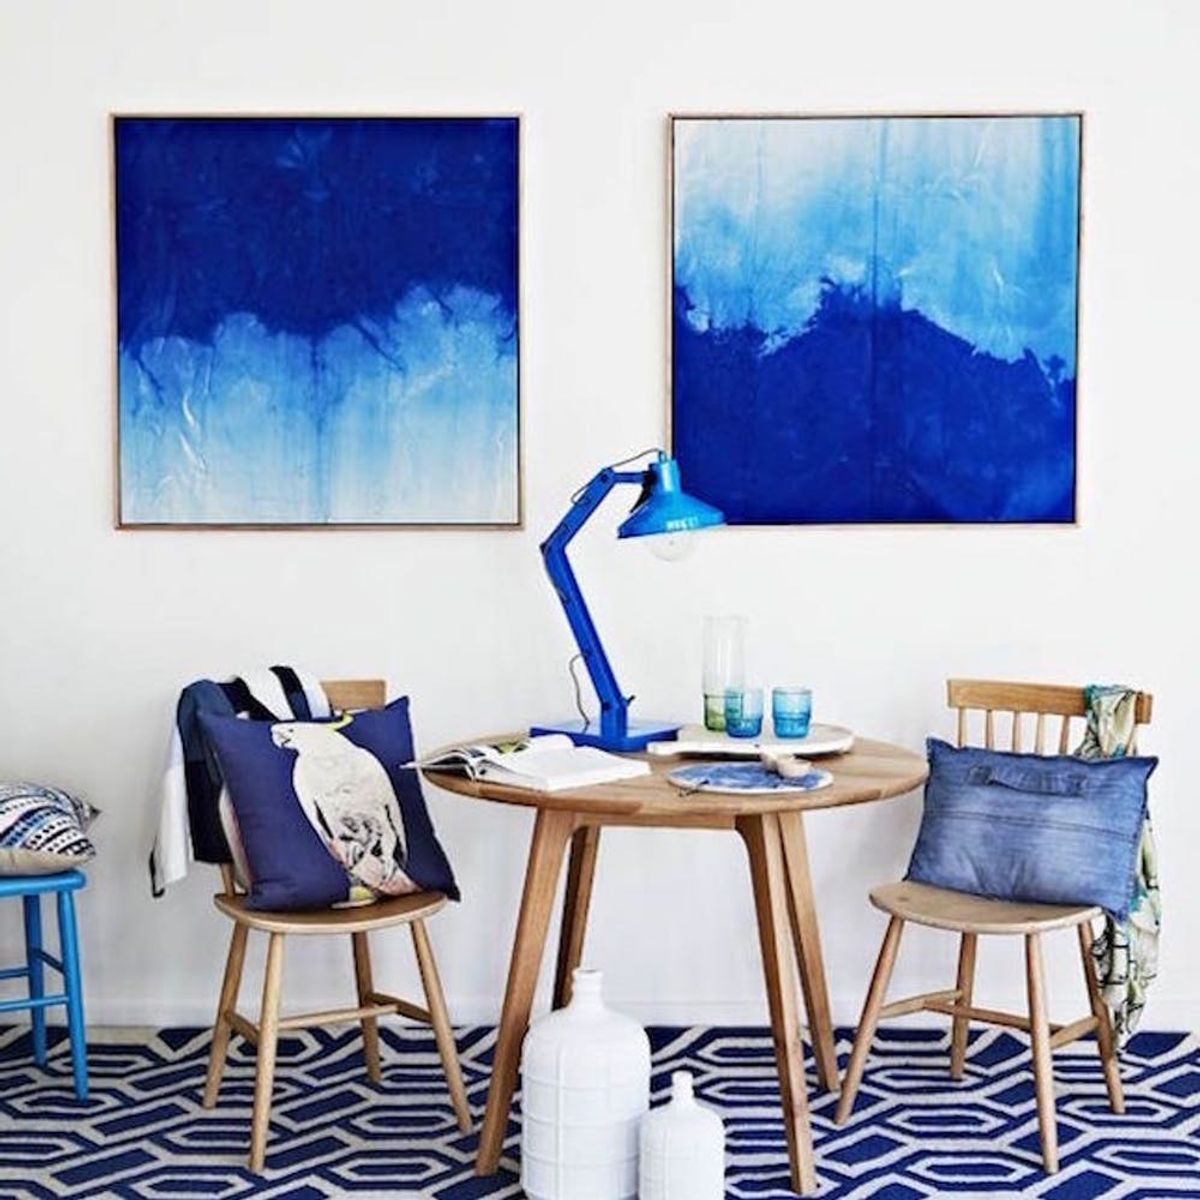 11 Ways to Decorate With September’s Birthstone: Sapphire